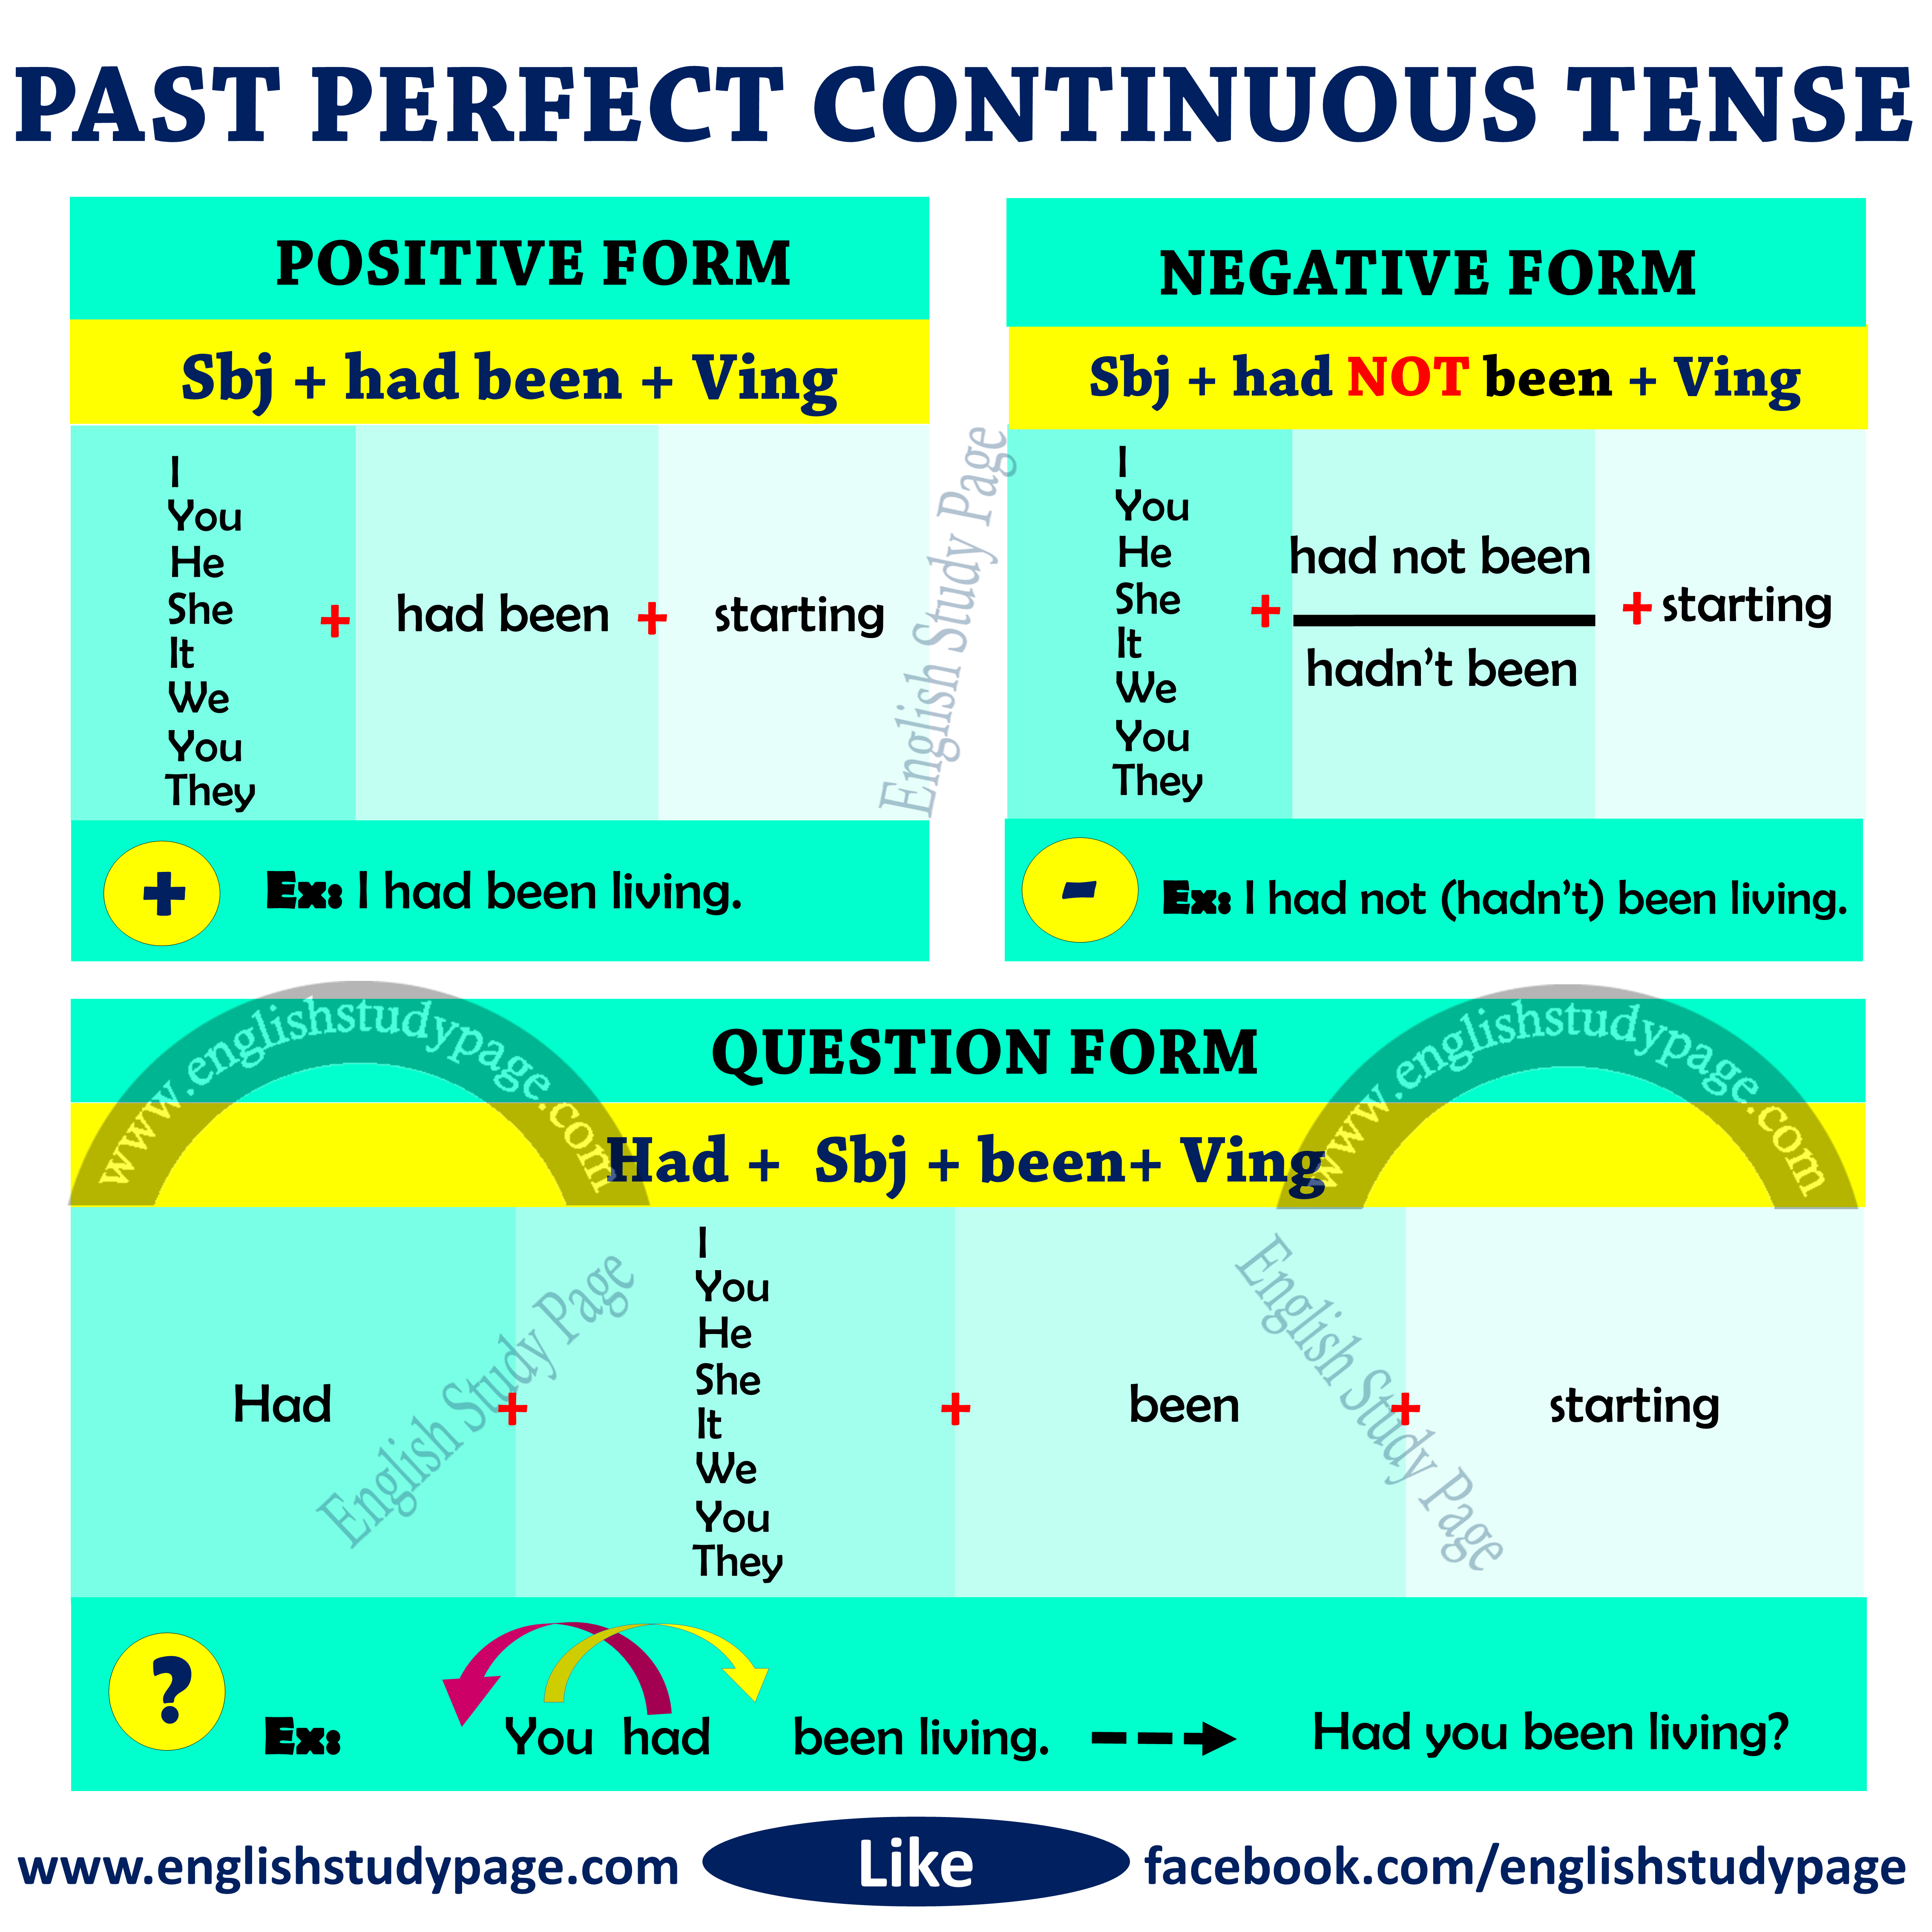 Past perfect continuous